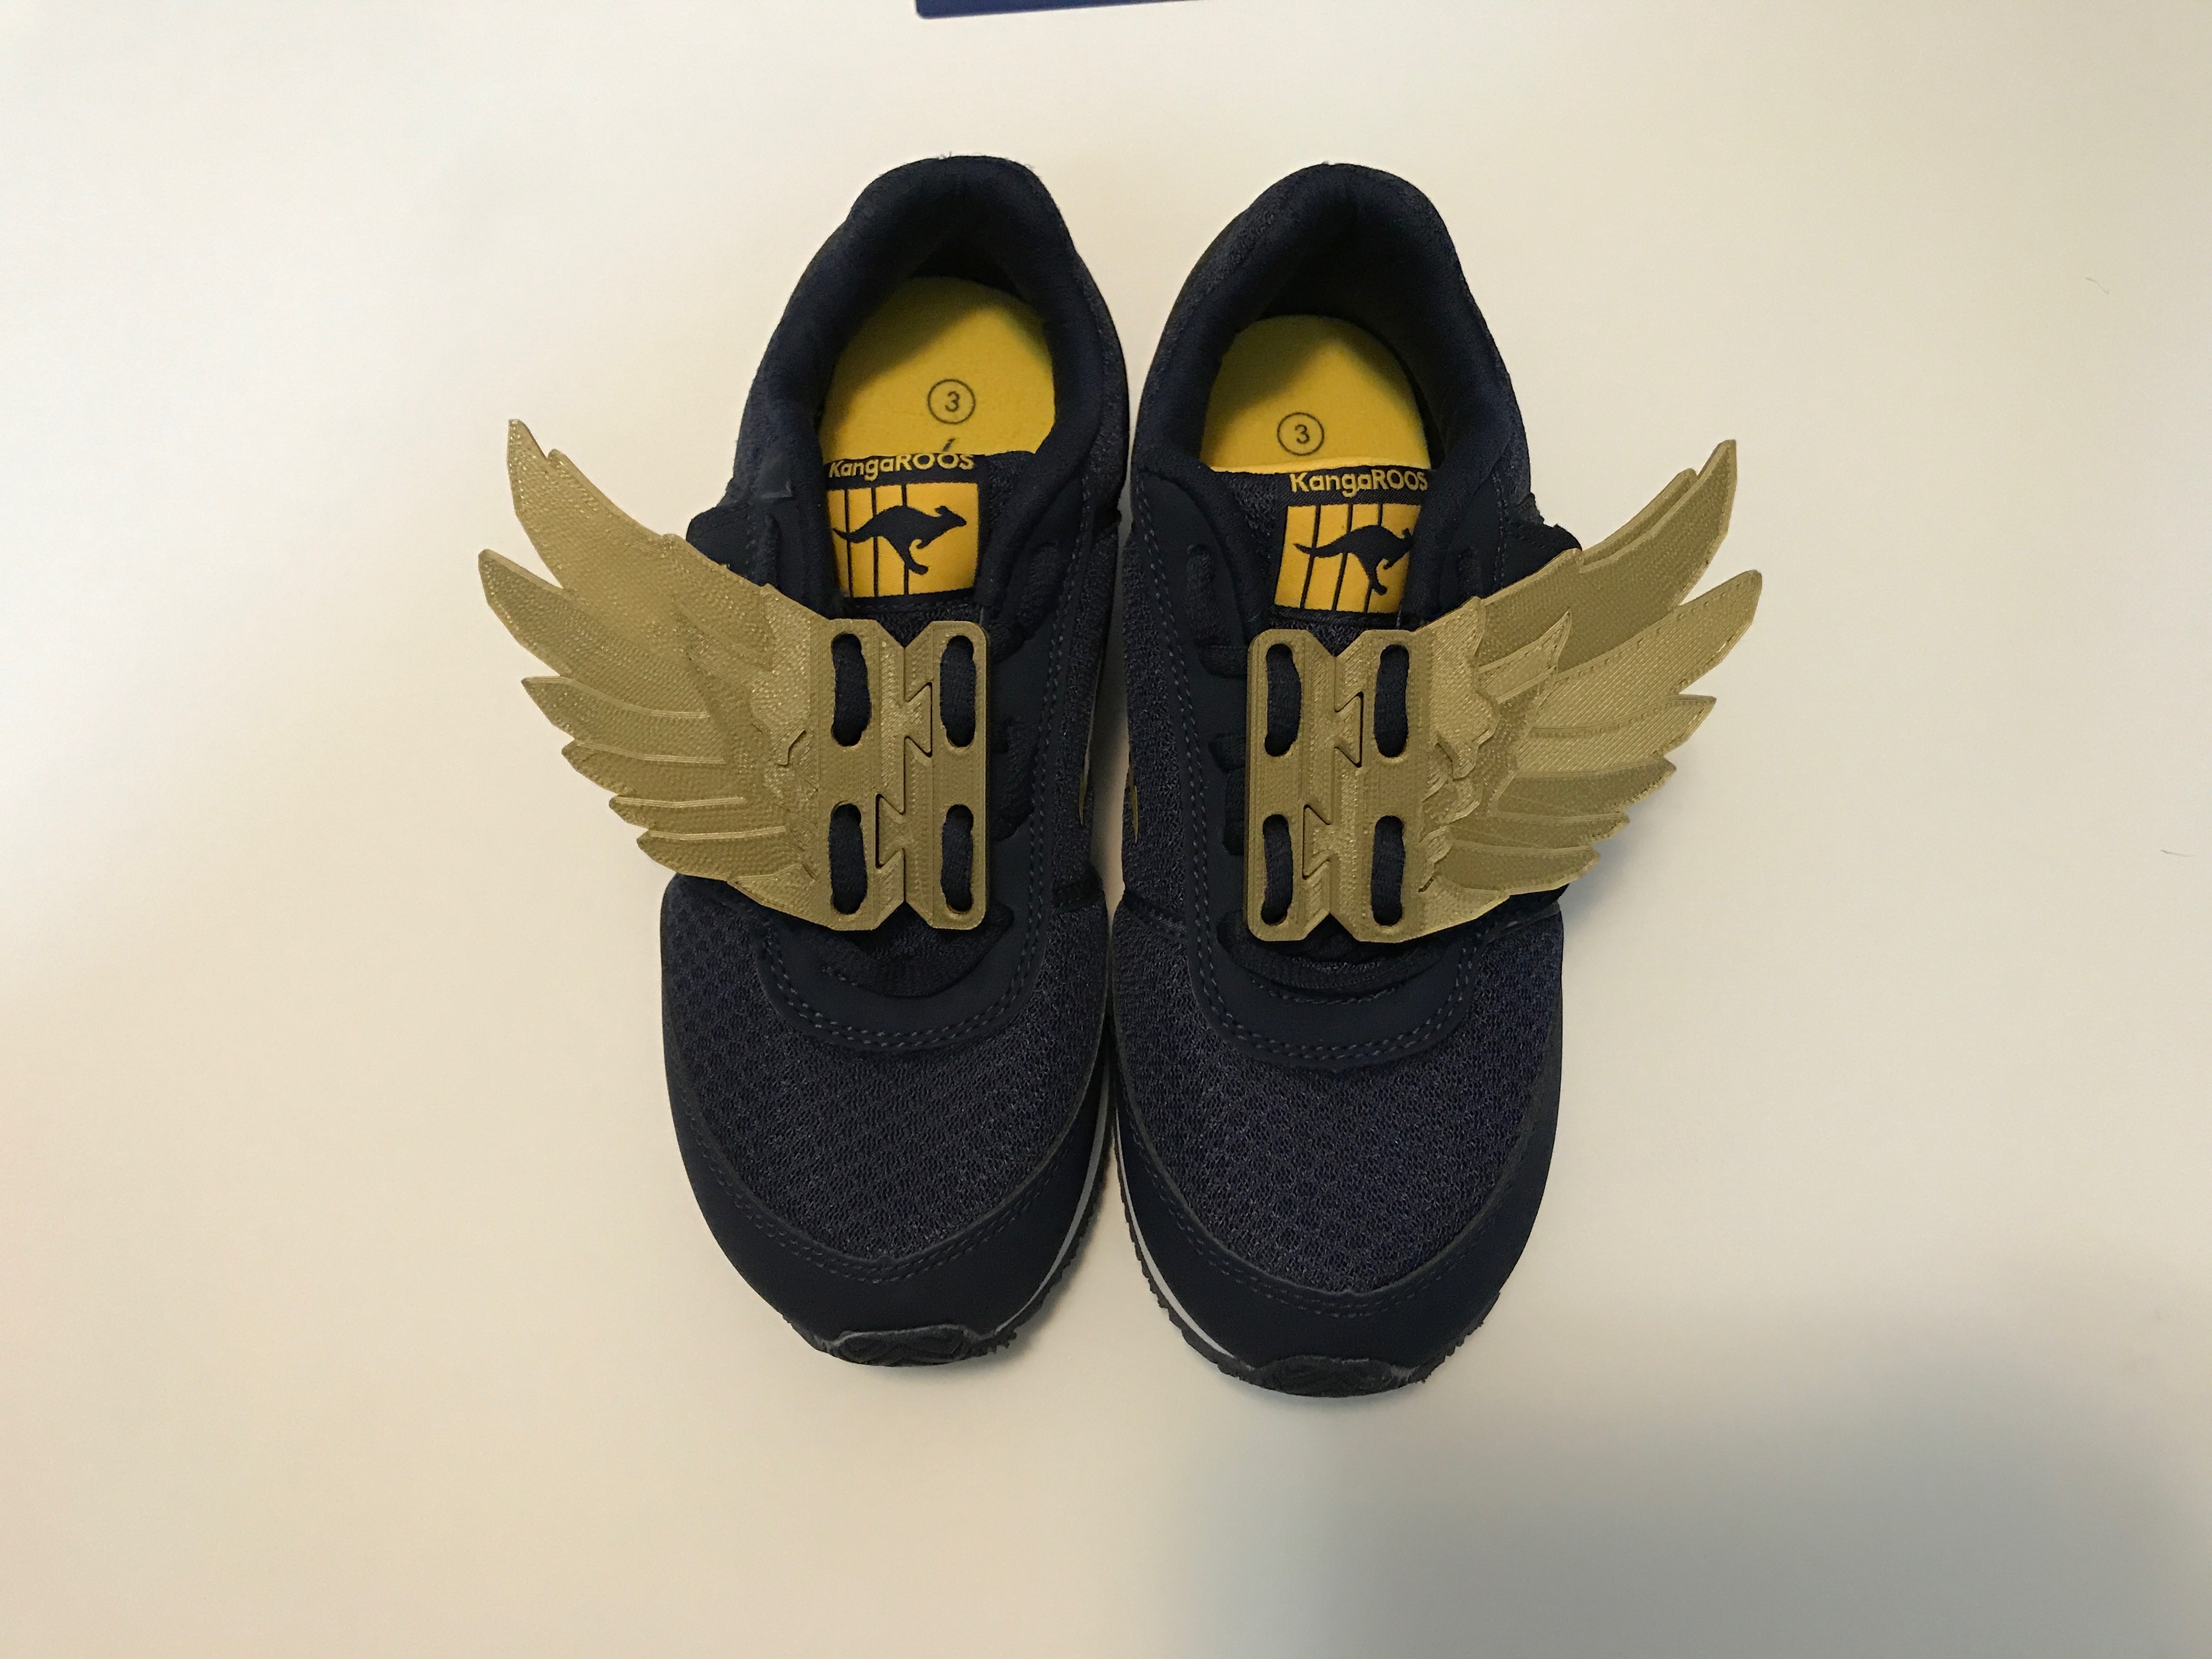 Shoe wings quick tieing